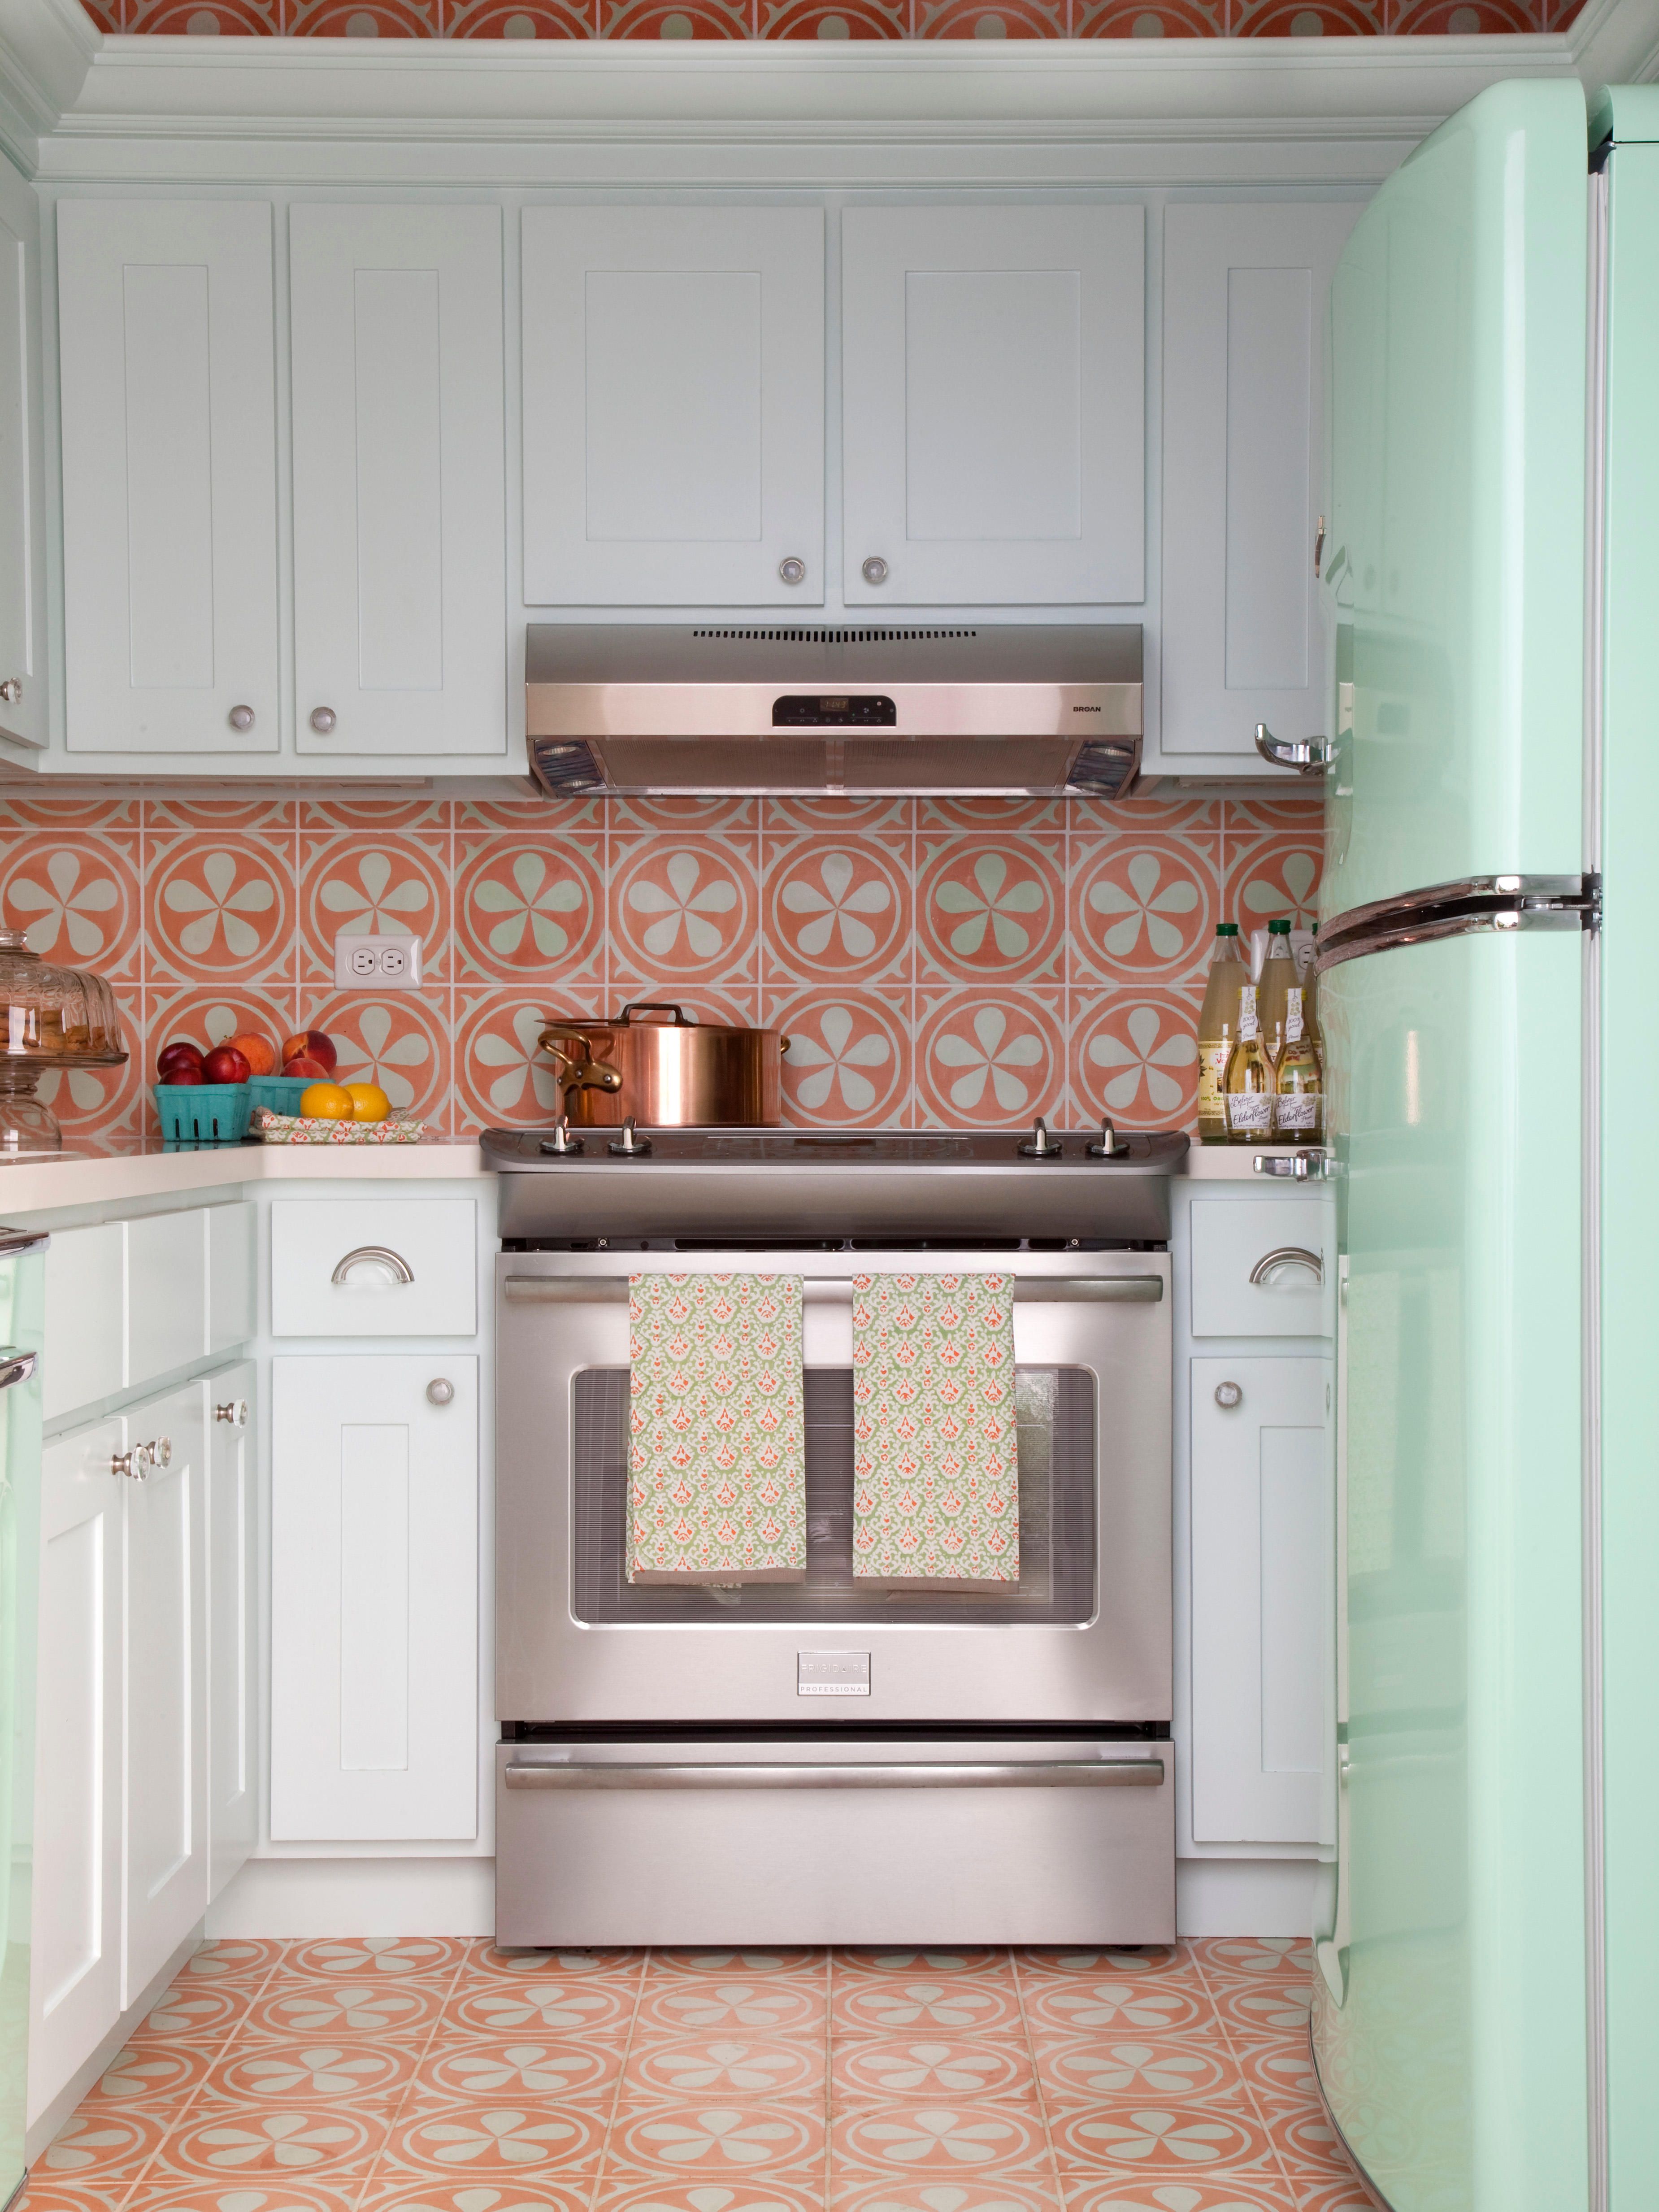 20 Cool Retro Kitchens   How to Decorate a Kitchen in Throwback Style